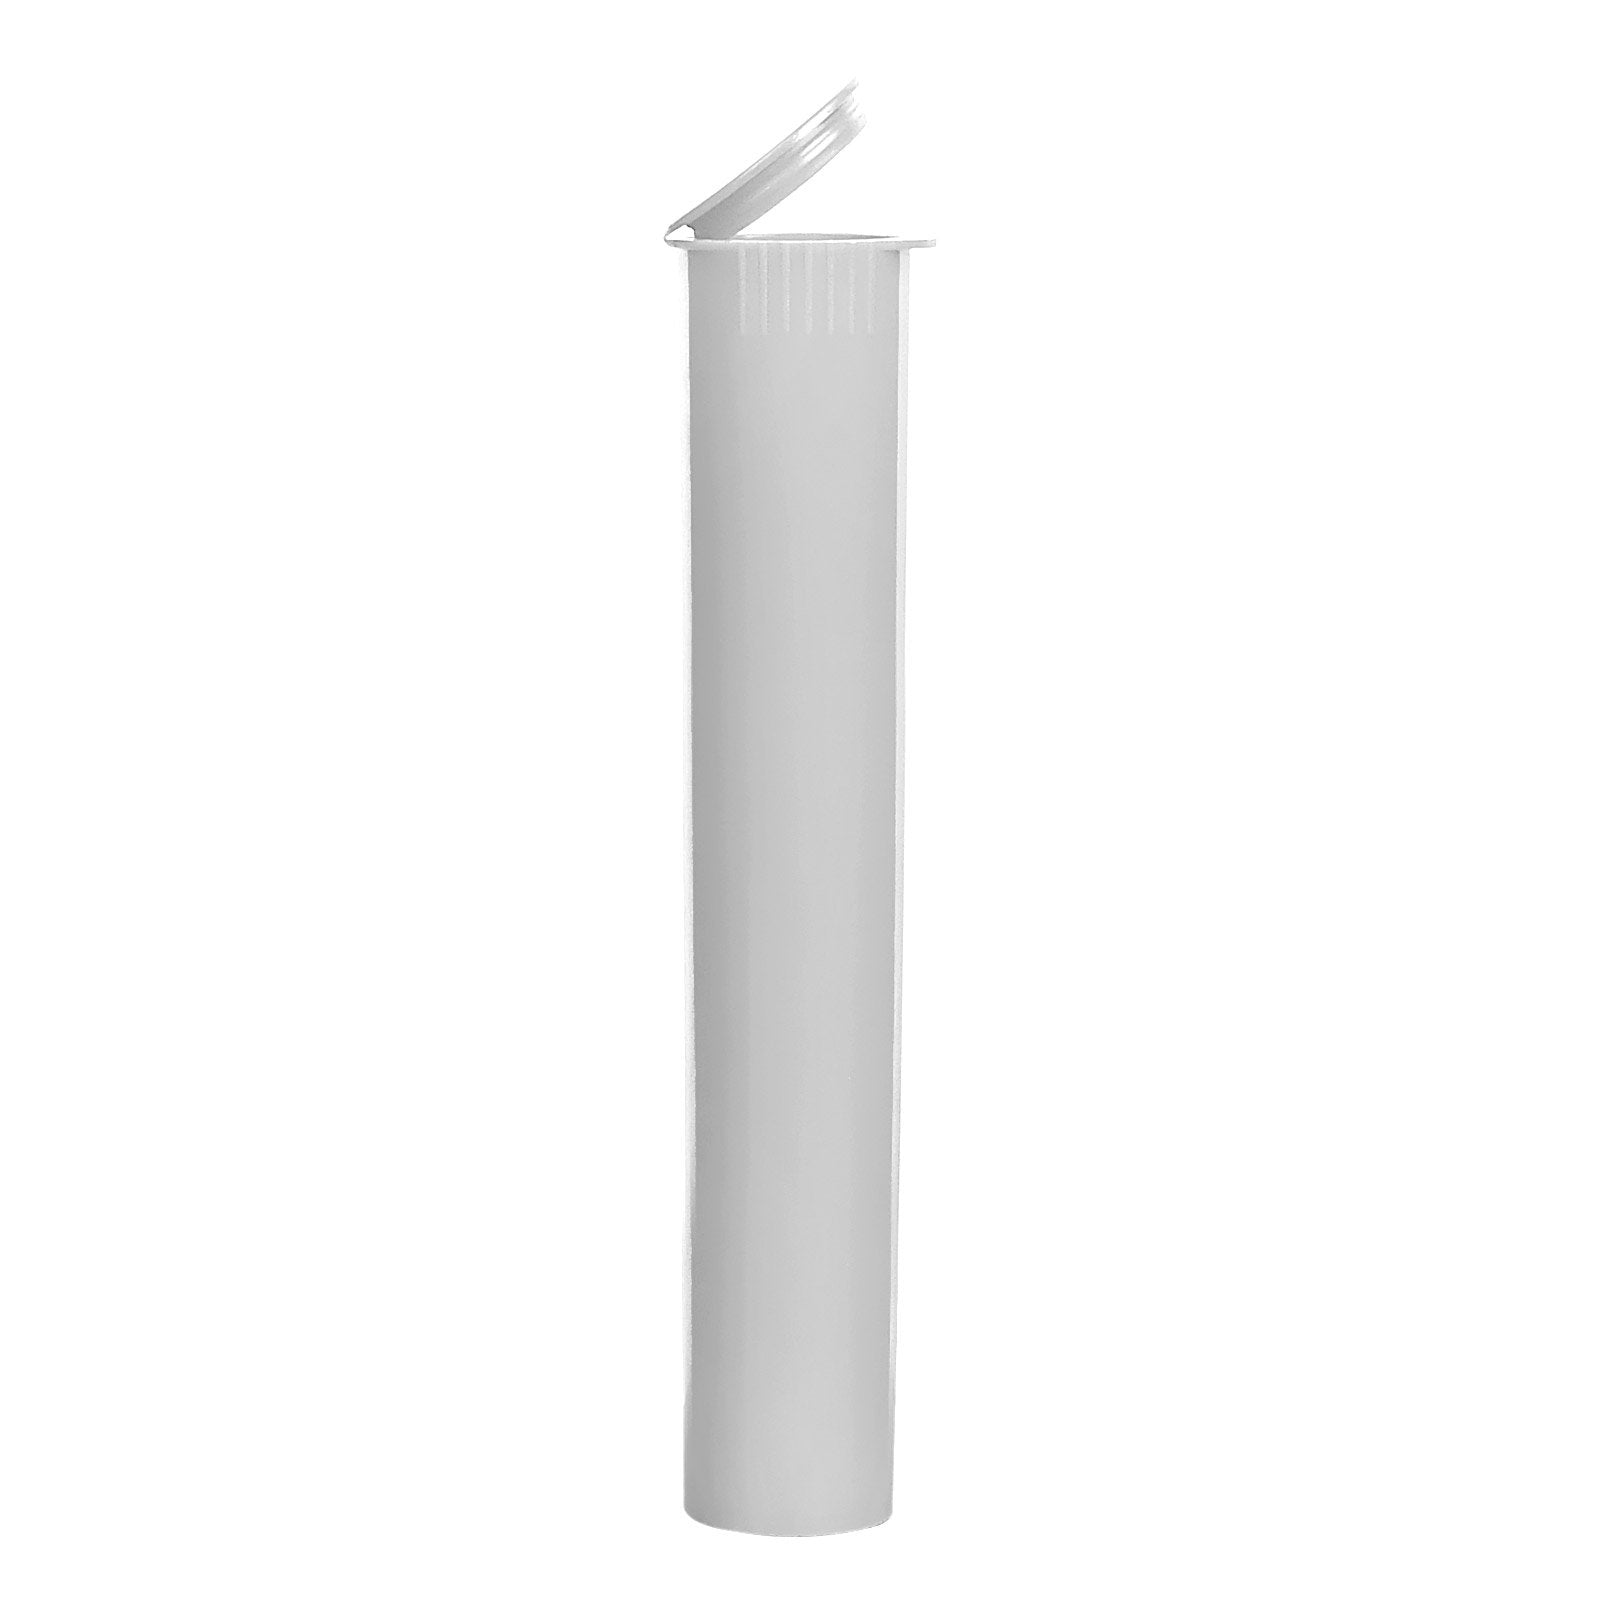 Opaque Squeeze Top Child-Resistant Pre-Roll Tube